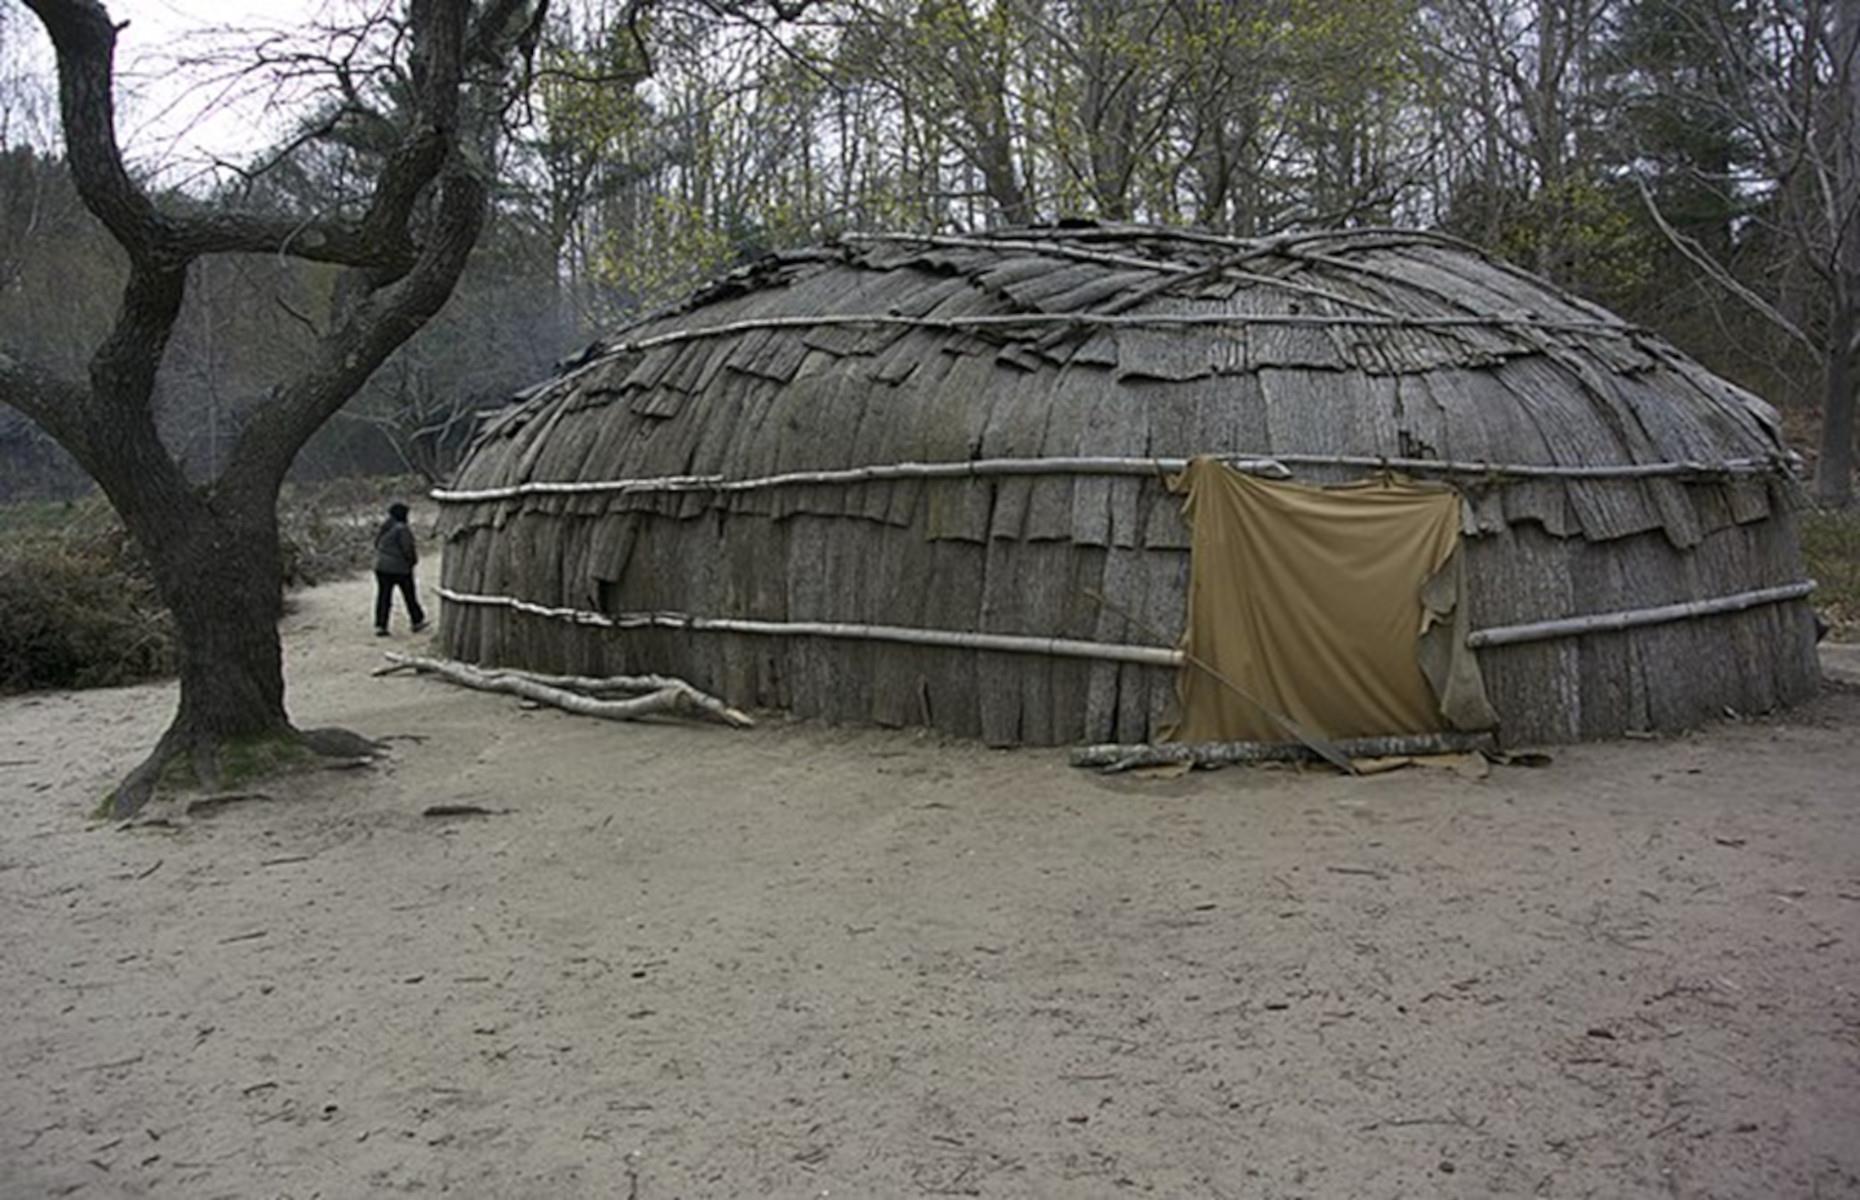 <p>However, before the colonists arrived in Massachusetts, the local Wampanoag people numbered between 50,000 and 100,000 across 67 different villages. Historic Patuxet is a recreation of a traditional Wampanoag village, consisting of a cooking area, fields of crops, and several <em>wetus</em>, or houses. Each <em>wetu</em> is lined with fur-laden benches where the villagers would gather around a fire for storytelling and song to pass the long winter nights and ward off the cold.</p>